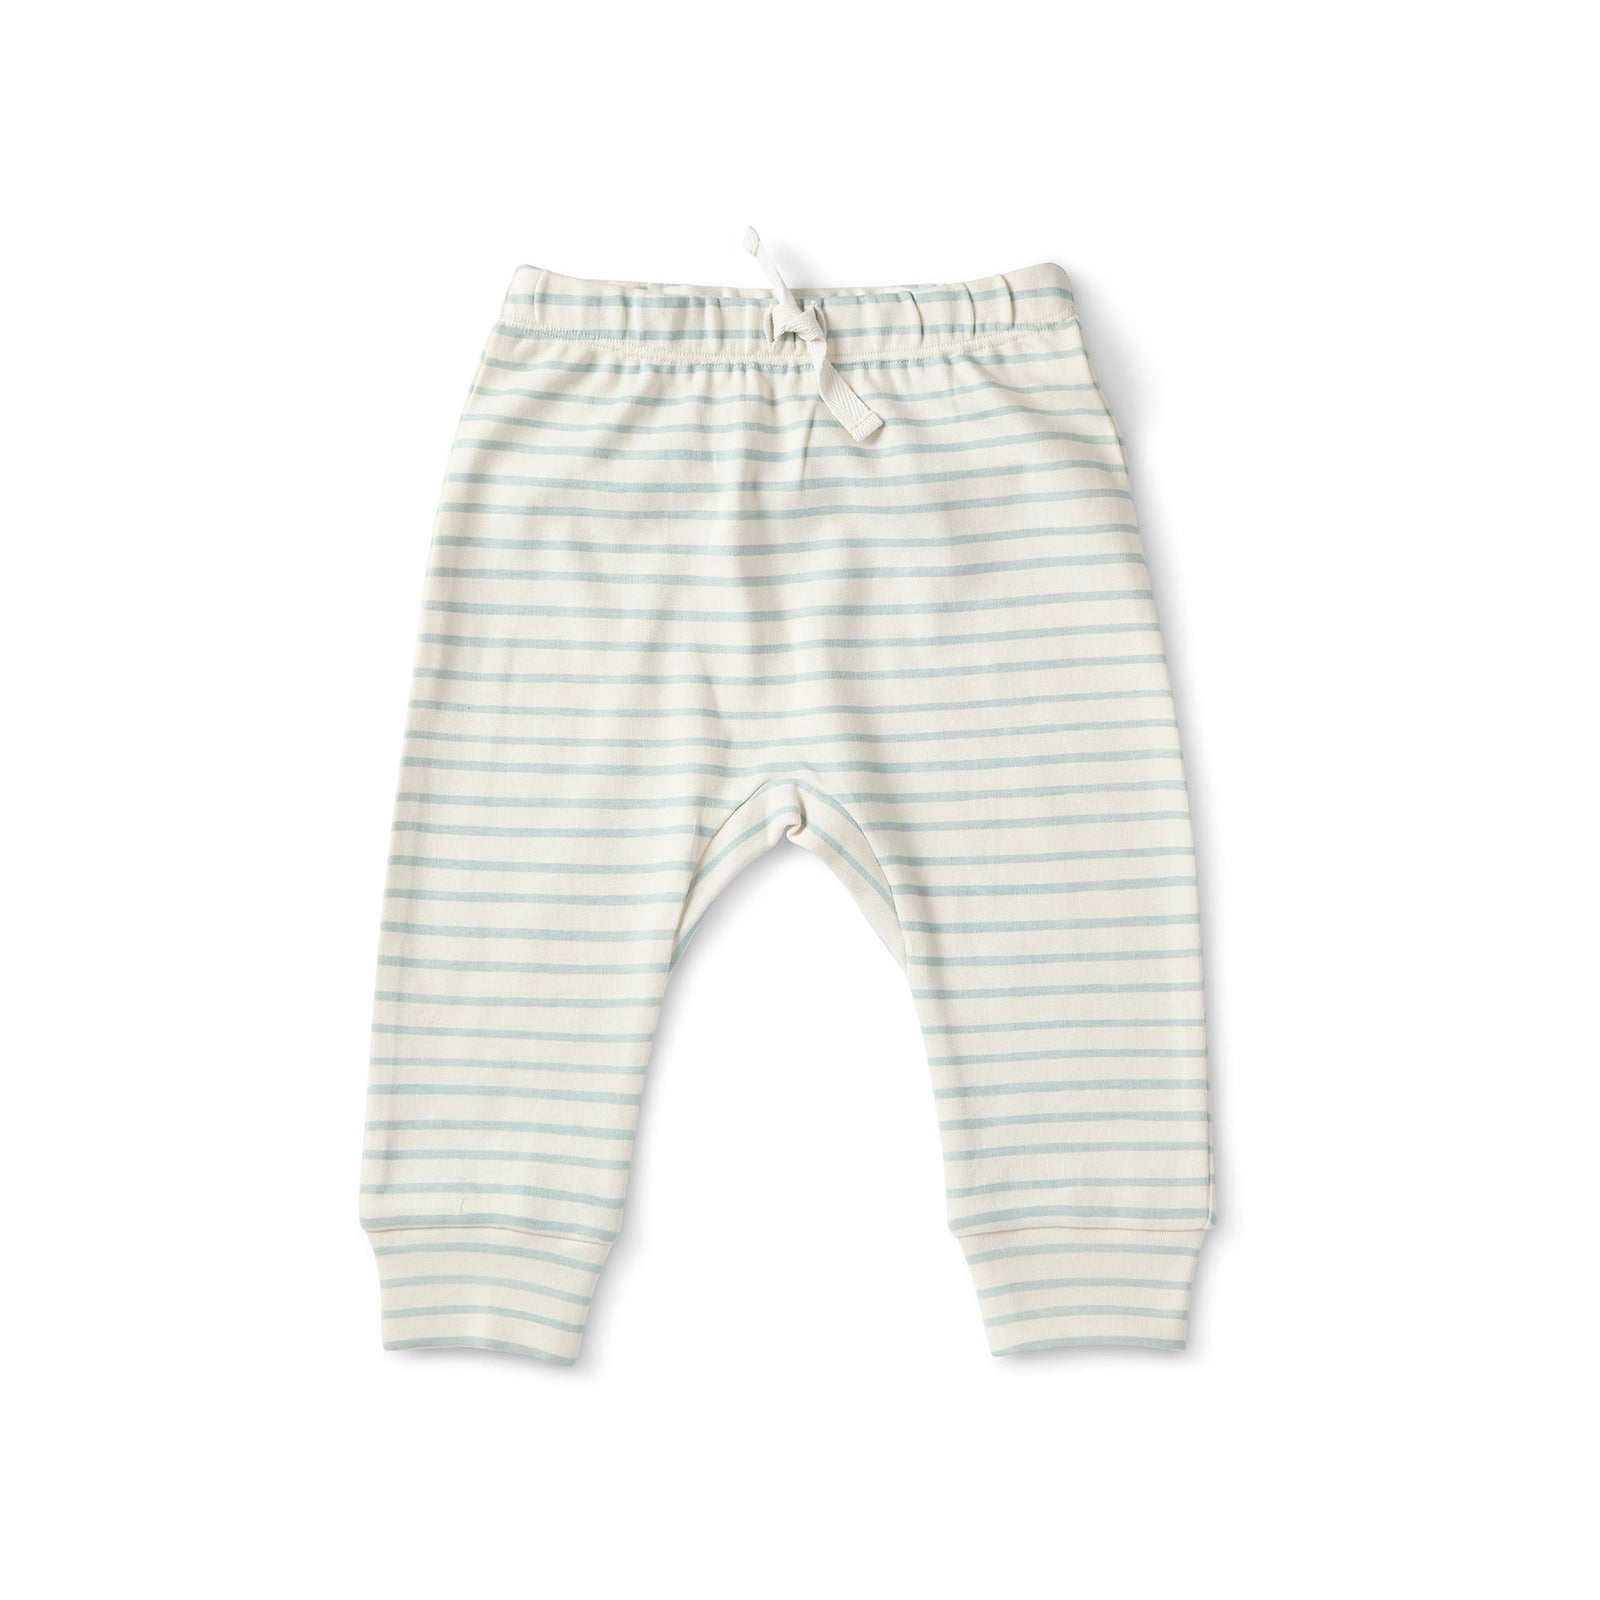 Pehr Sea Organic Harem Pant. GOTS Certified Organic Cotton & Dyes. White with light blue stripes.